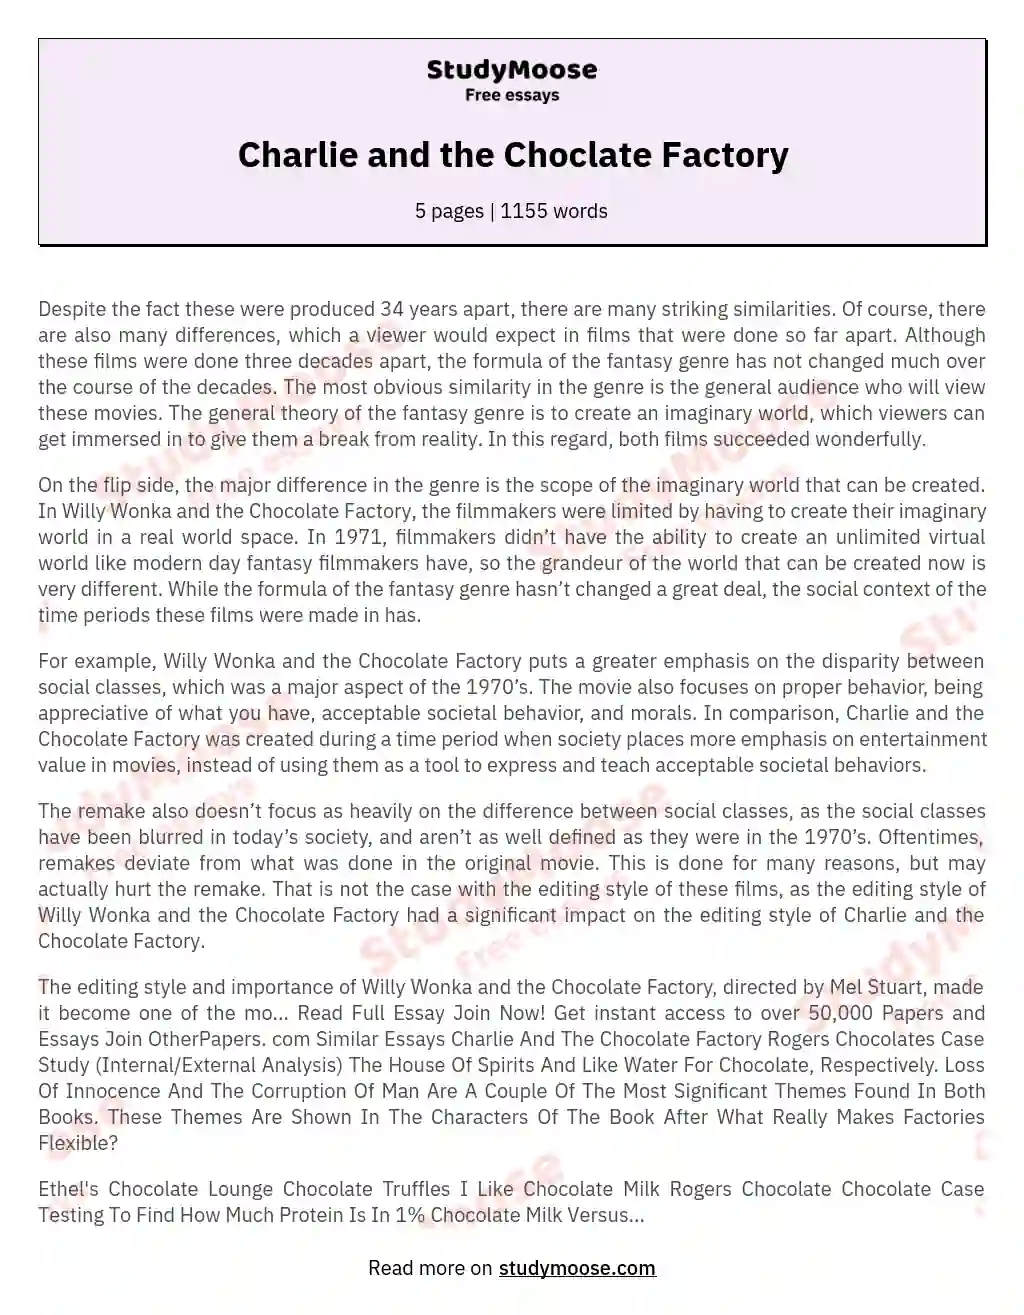 Charlie and the Choclate Factory essay